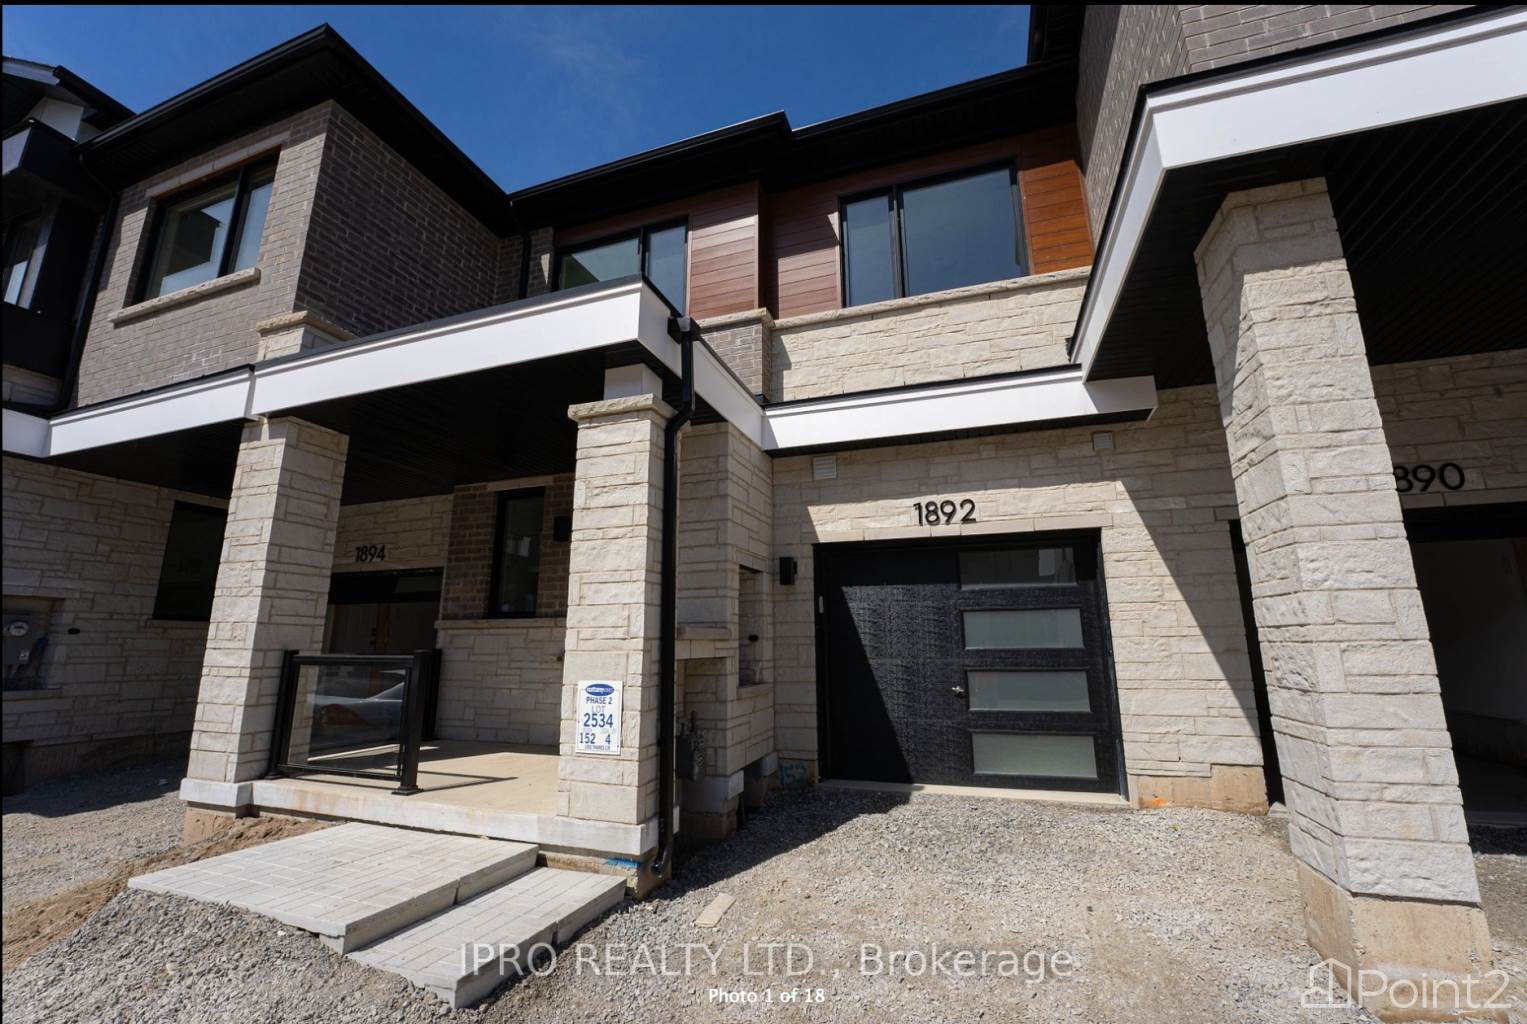 Residential Home For Rent | Milton On 3 Bed 3 Bath Brand New Townhouse For Rent | Milton | L9T6H8